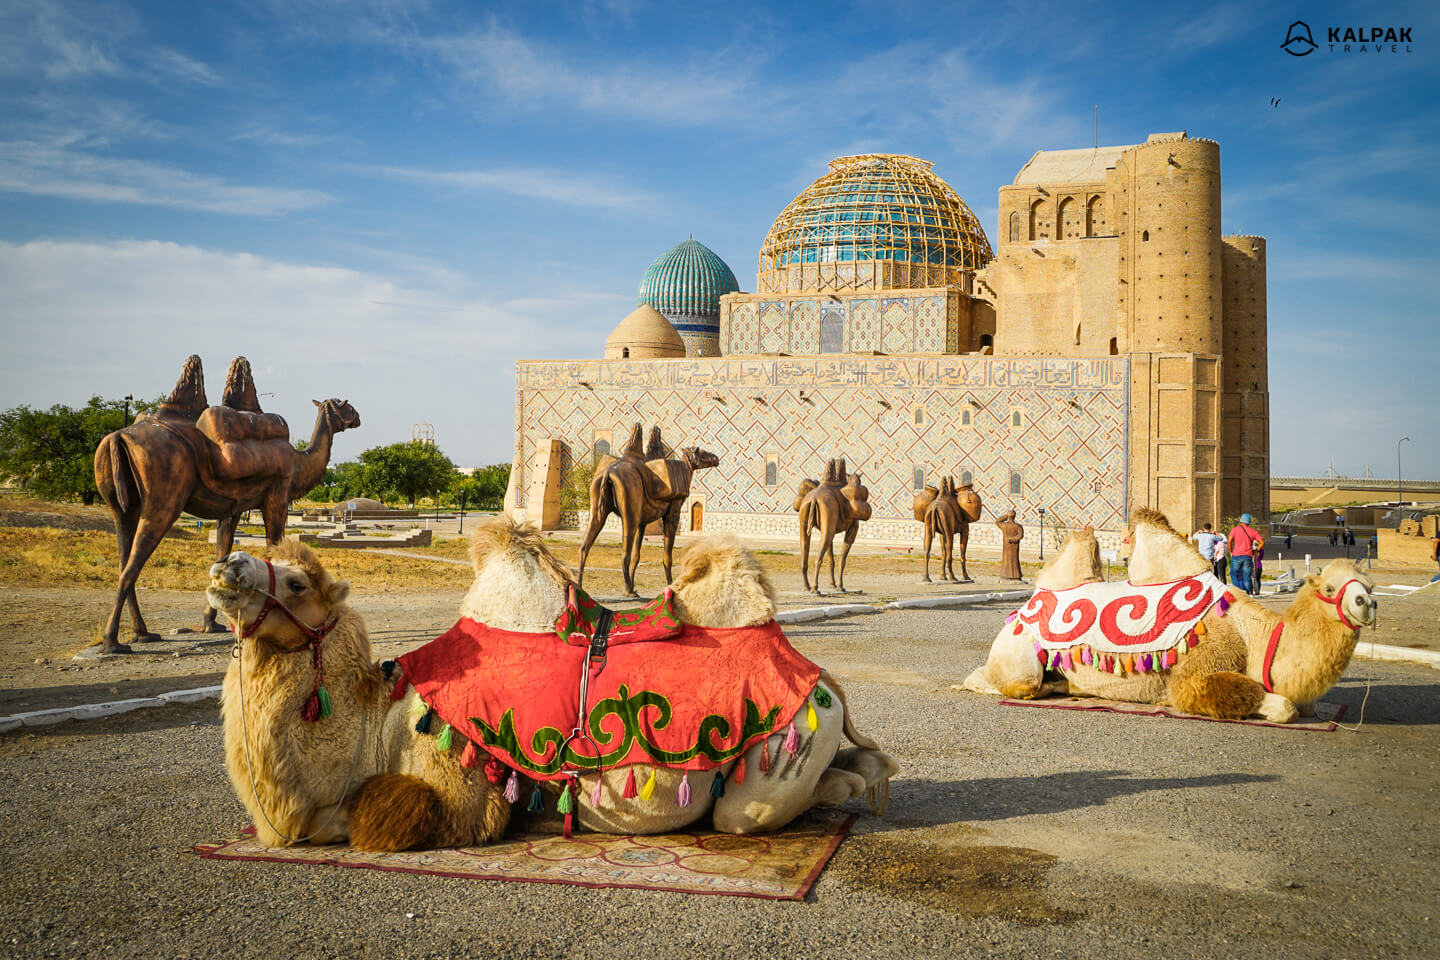 Turkistan mausoleum with camels like in Silk Road times